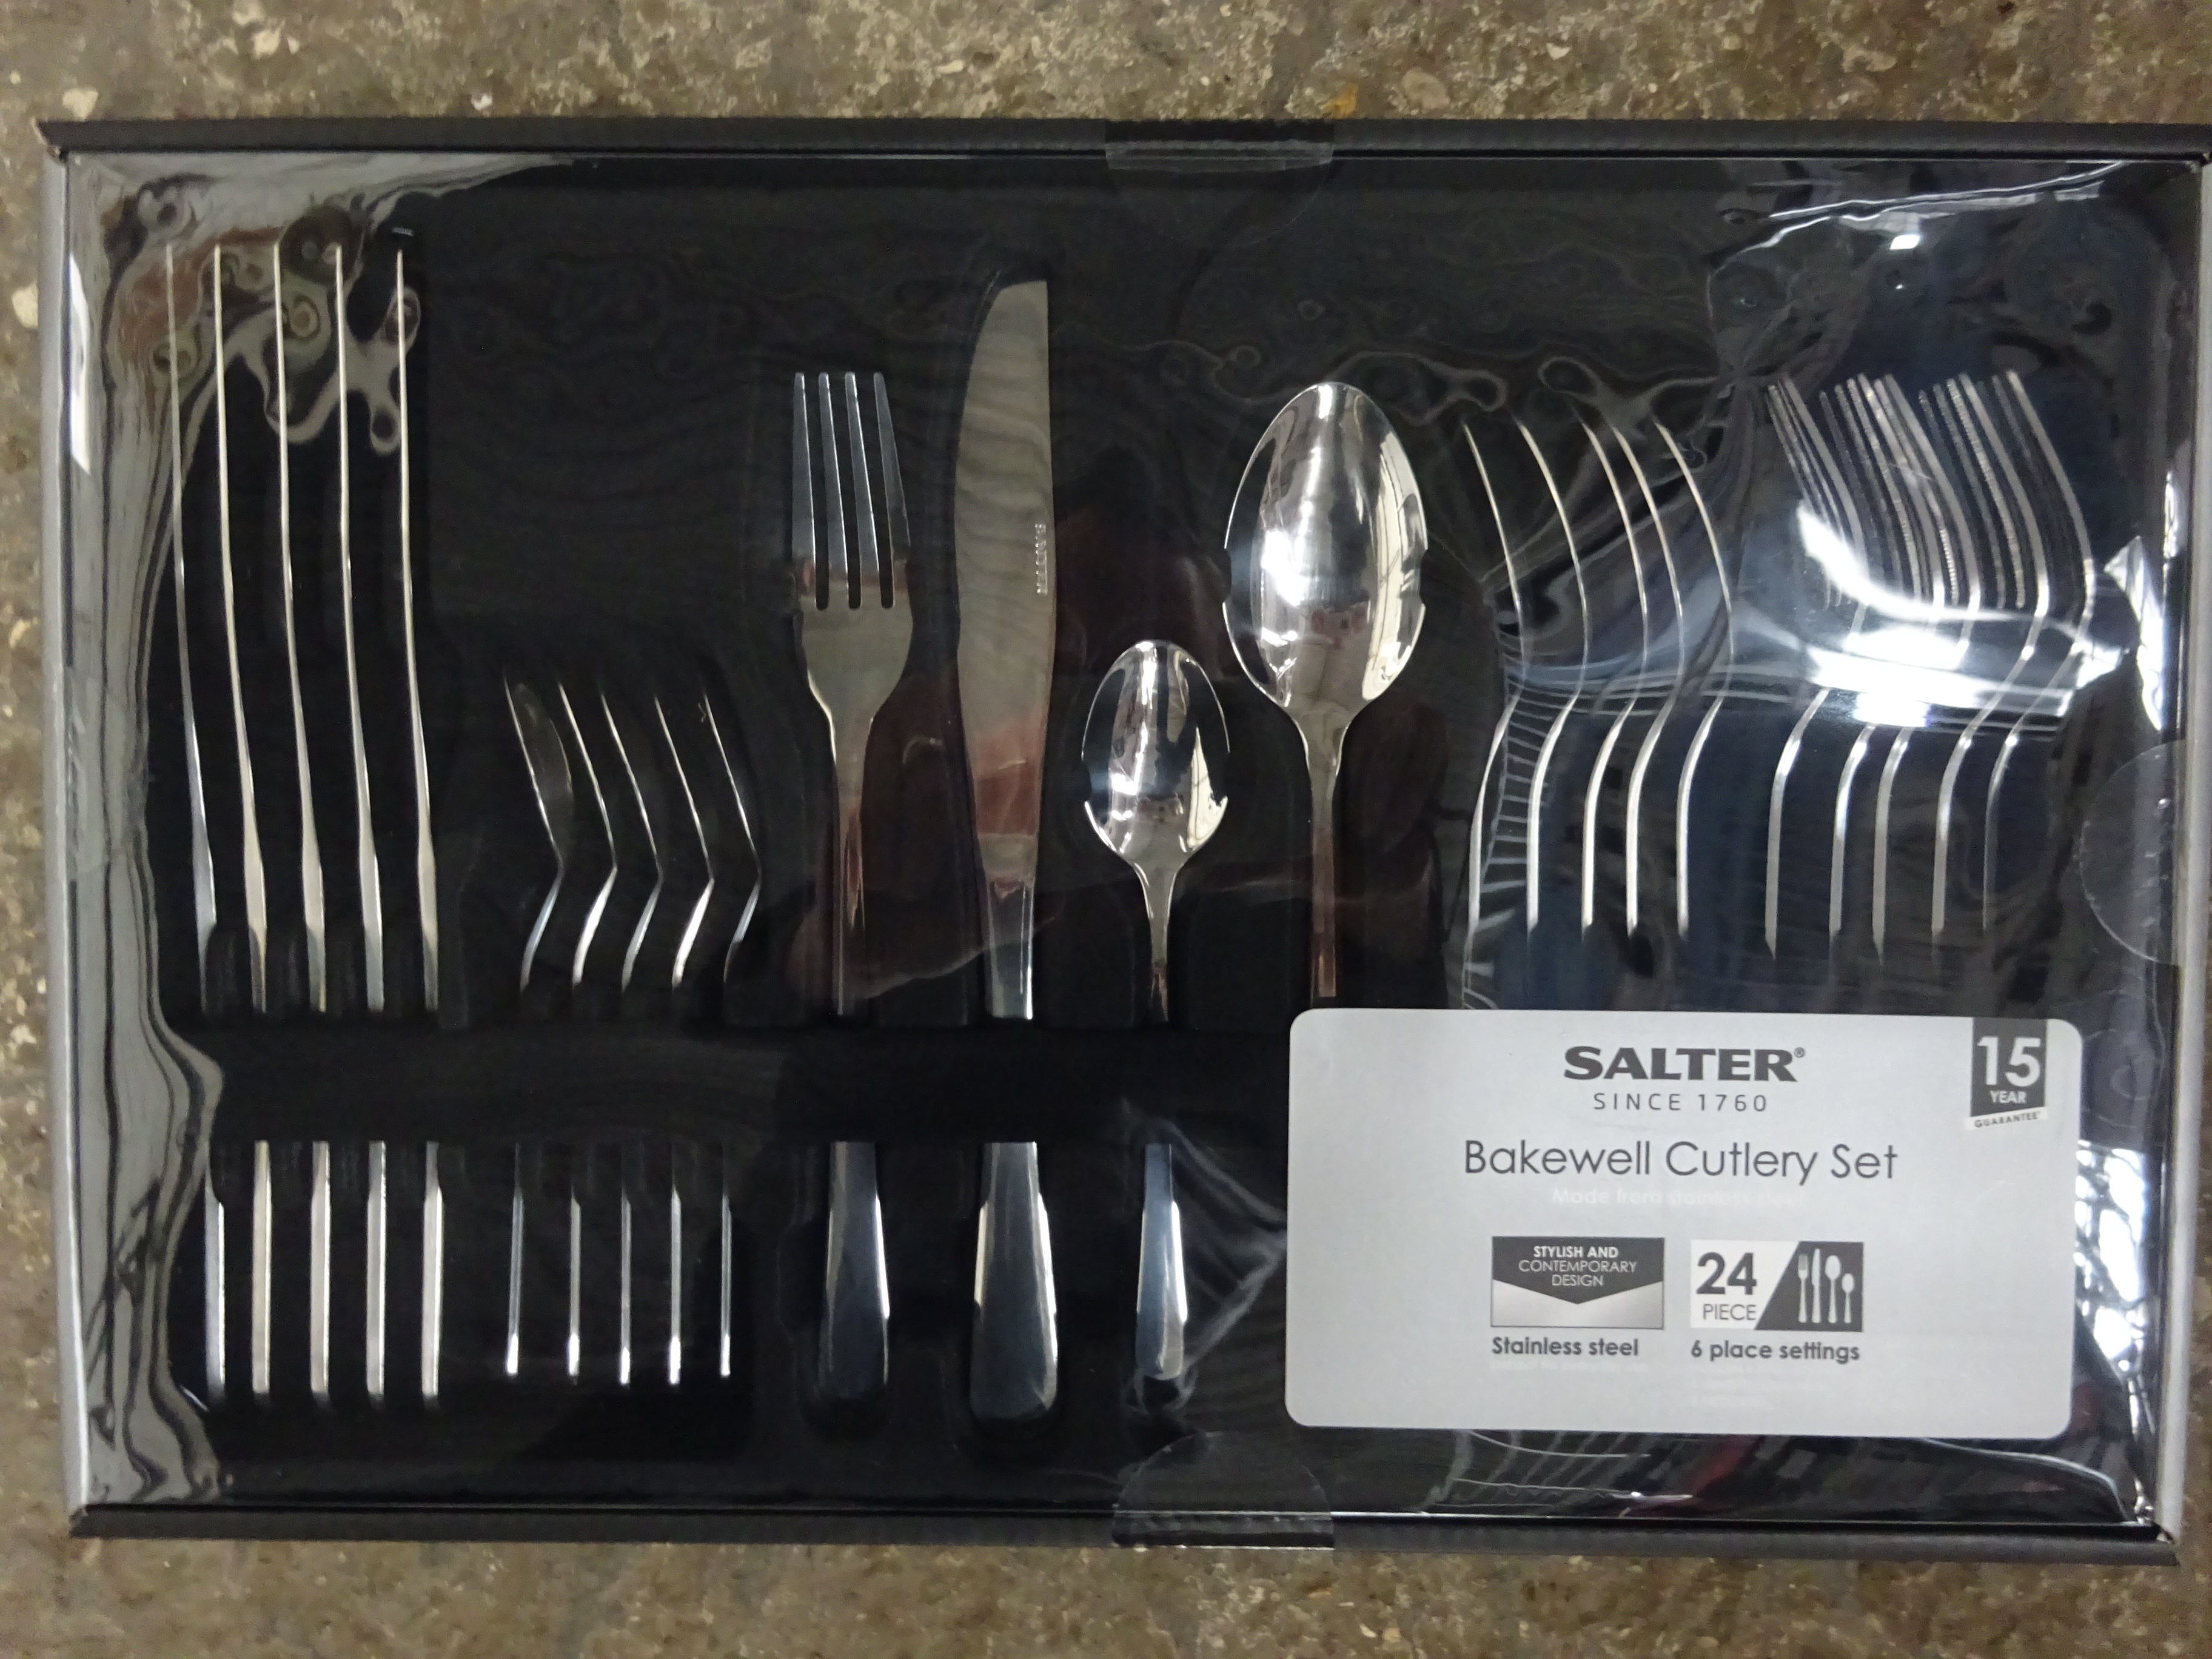 Salter 24pc cutlery set. This item carries VAT. - Image 2 of 2